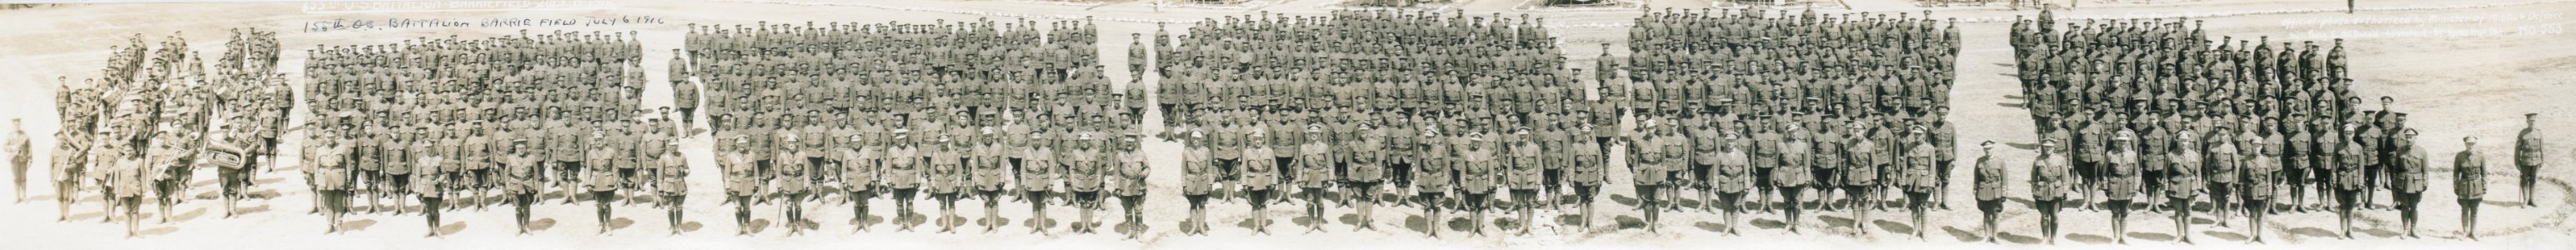 155th Battalion, Barriefield, July 6, 1916. No. 498 (HS85-10-32556) photo